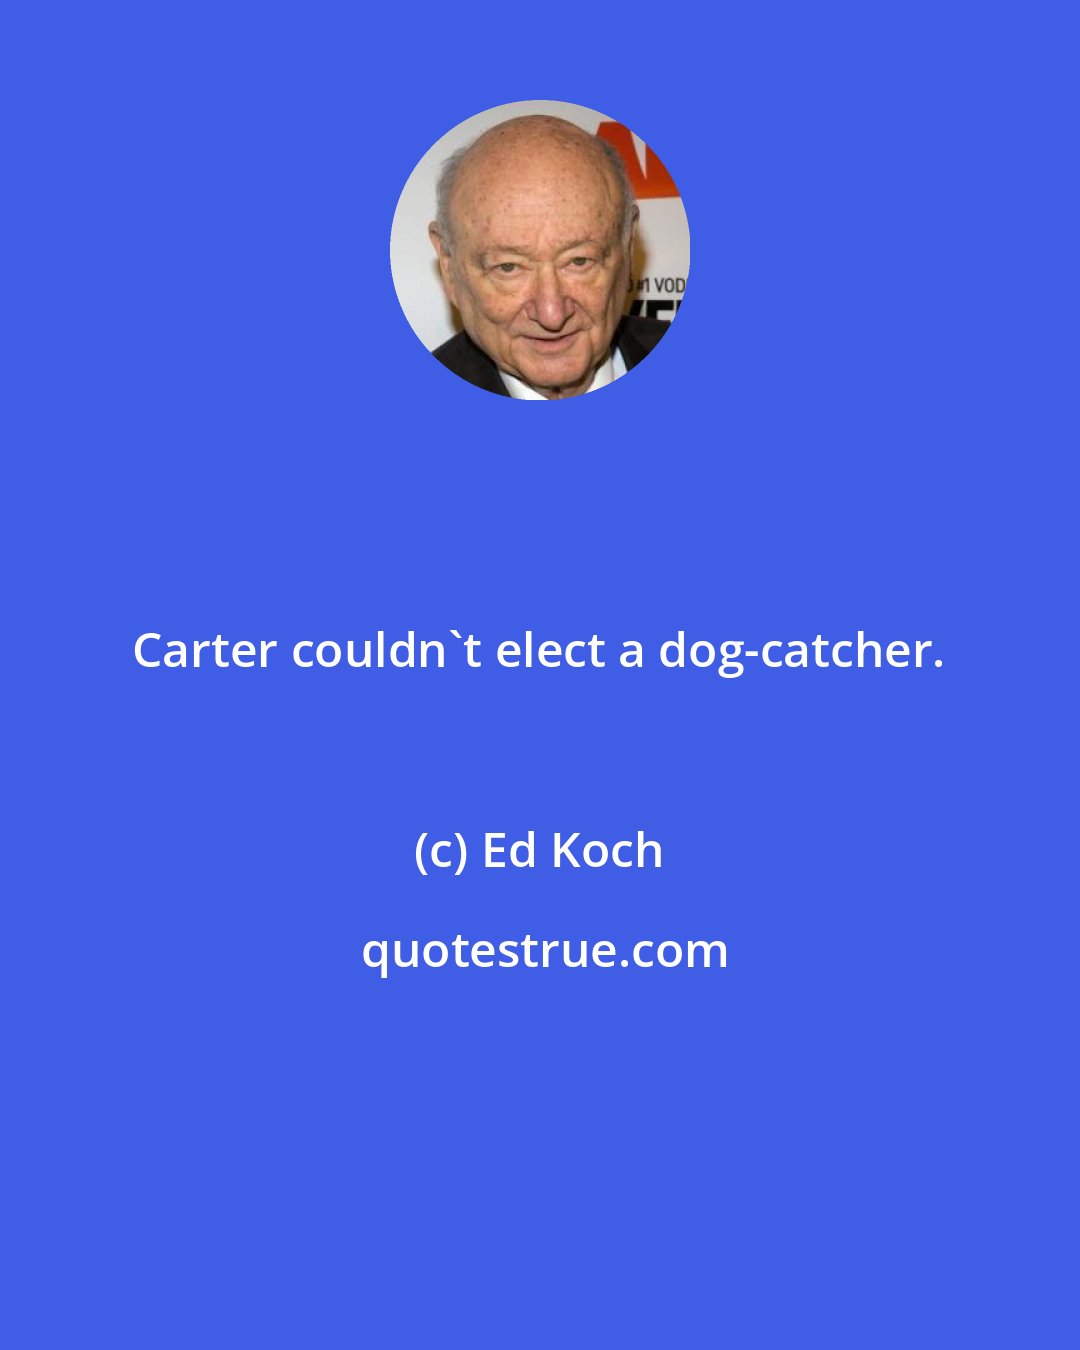 Ed Koch: Carter couldn't elect a dog-catcher.